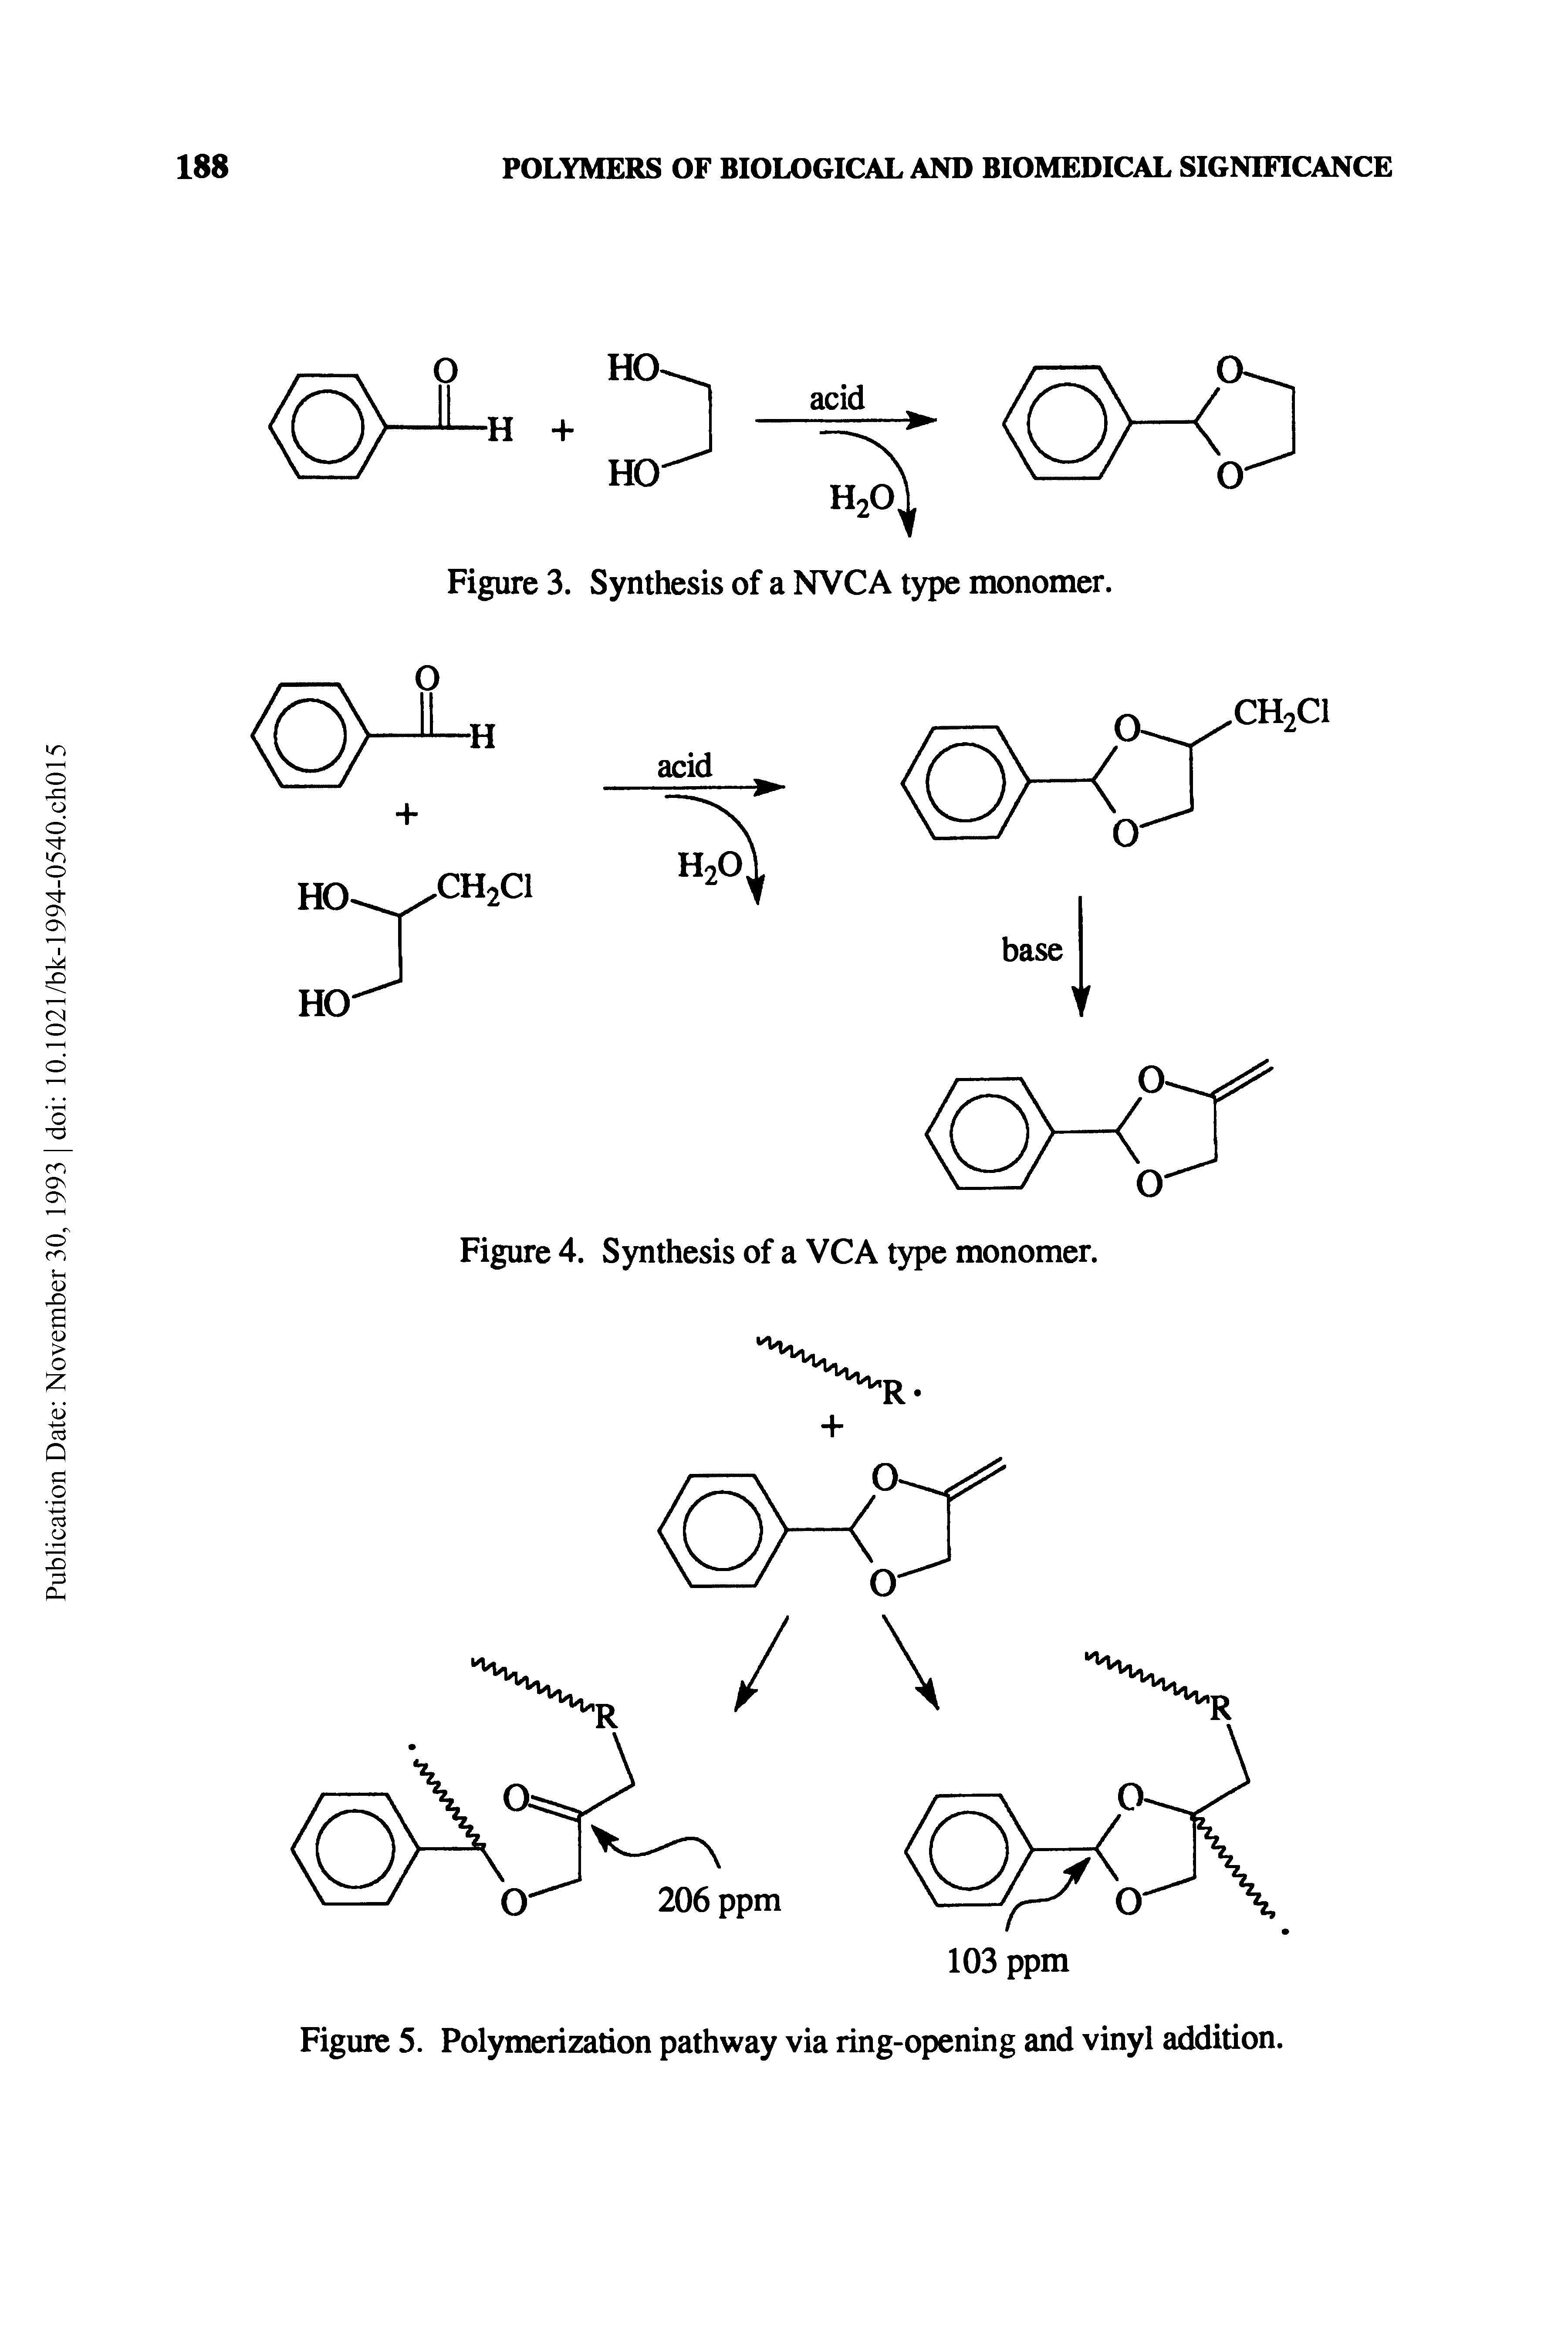 Figure 5. Polymerization pathway via ring-opening and vinyl addition.